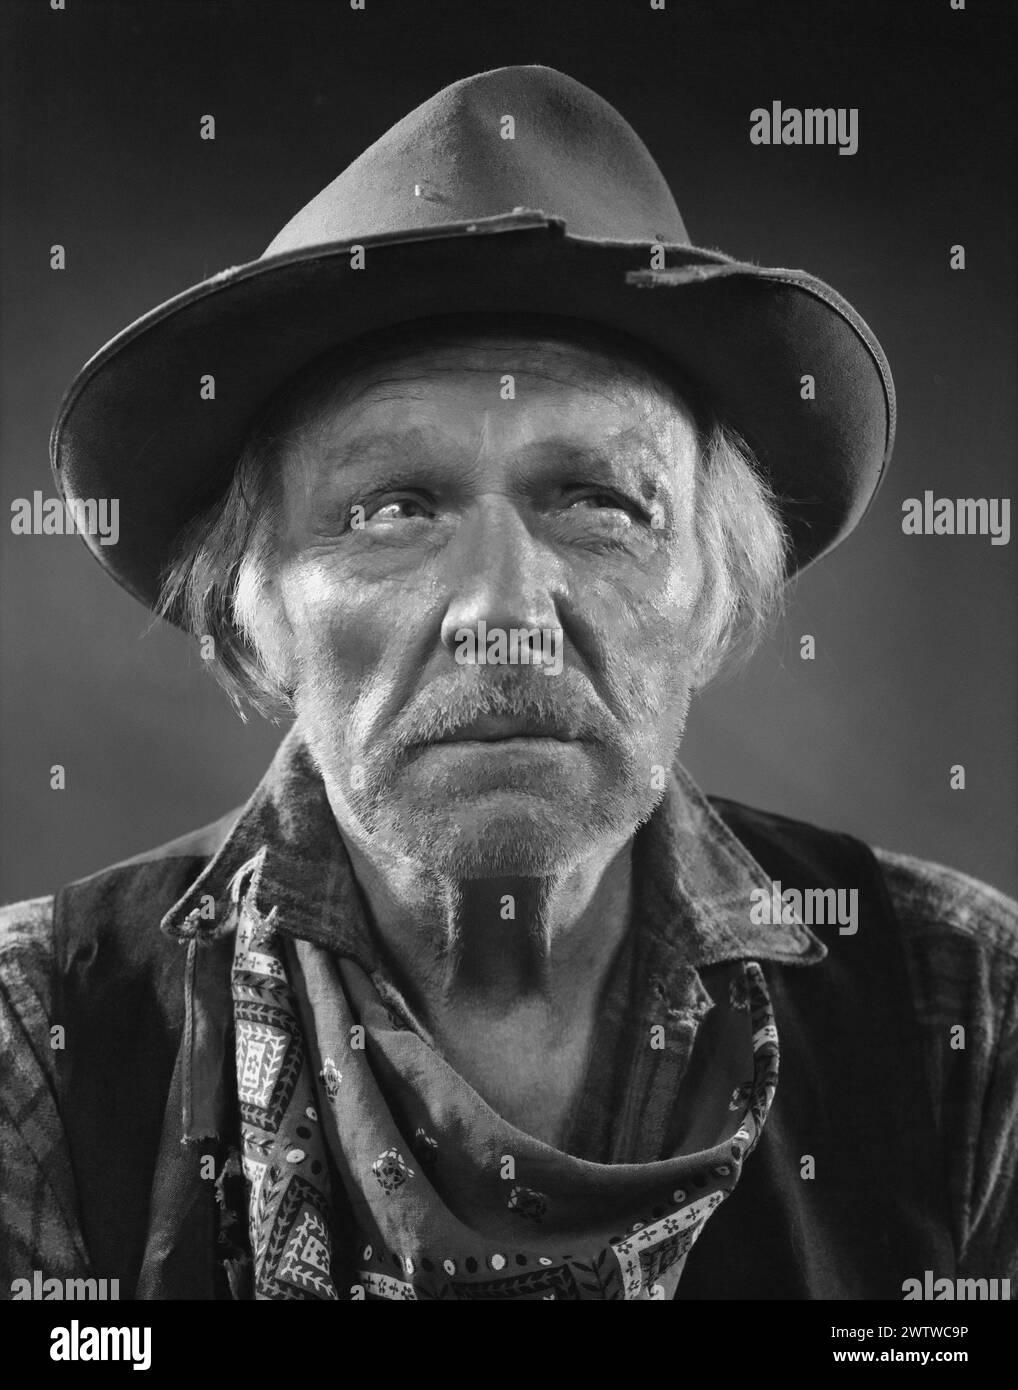 Close-up photo of an old prospector type individual with a scruffy beard, torn hat and neck kerchief, glancing off to the side Stock Photo